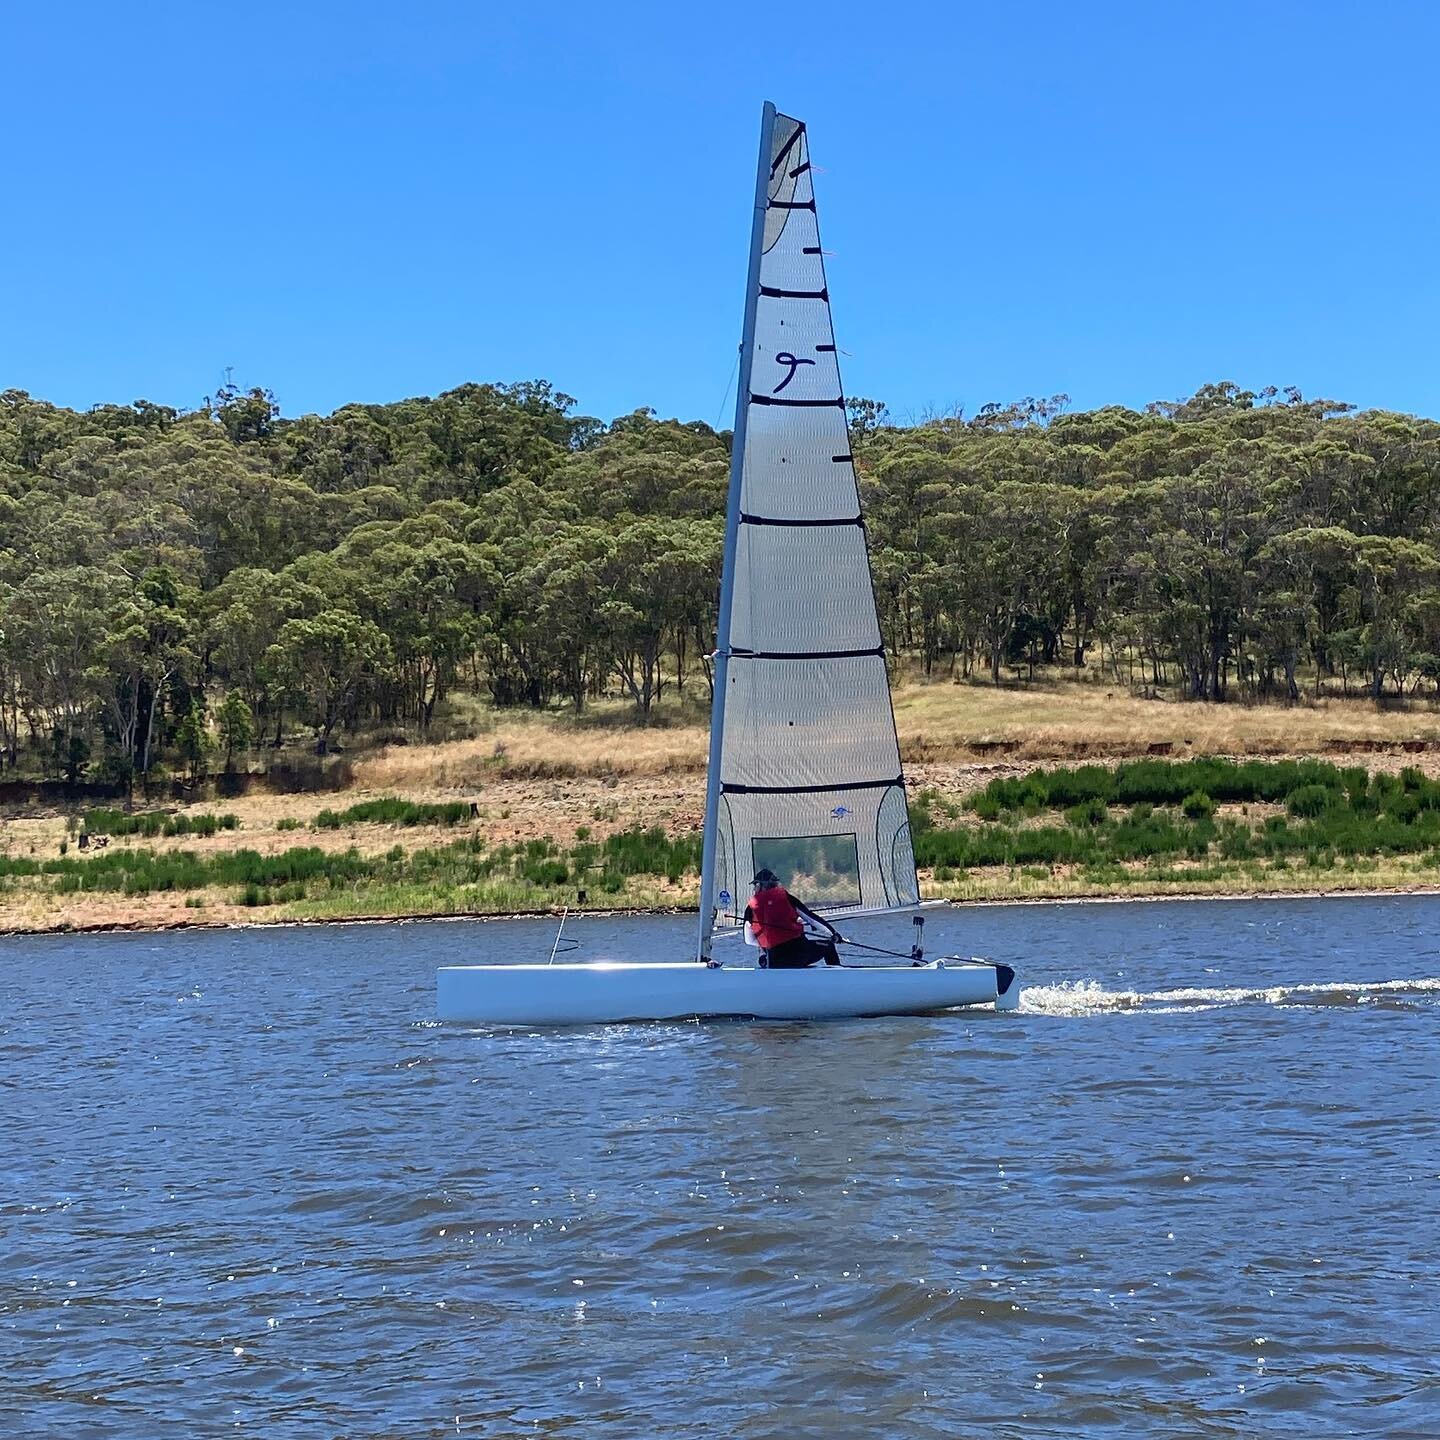 Assessment of Taipan 4.9m &ldquo;Youth&rdquo; Mainsail by Carl Schultz, Wallerawang Sailing Club (near Lithgow)
Background
I am 66 years old, 1.68m tall (when I grow up I&rsquo;m going to get longer legs), 94kg and have been sailing Taipan 4.9&rsquo;